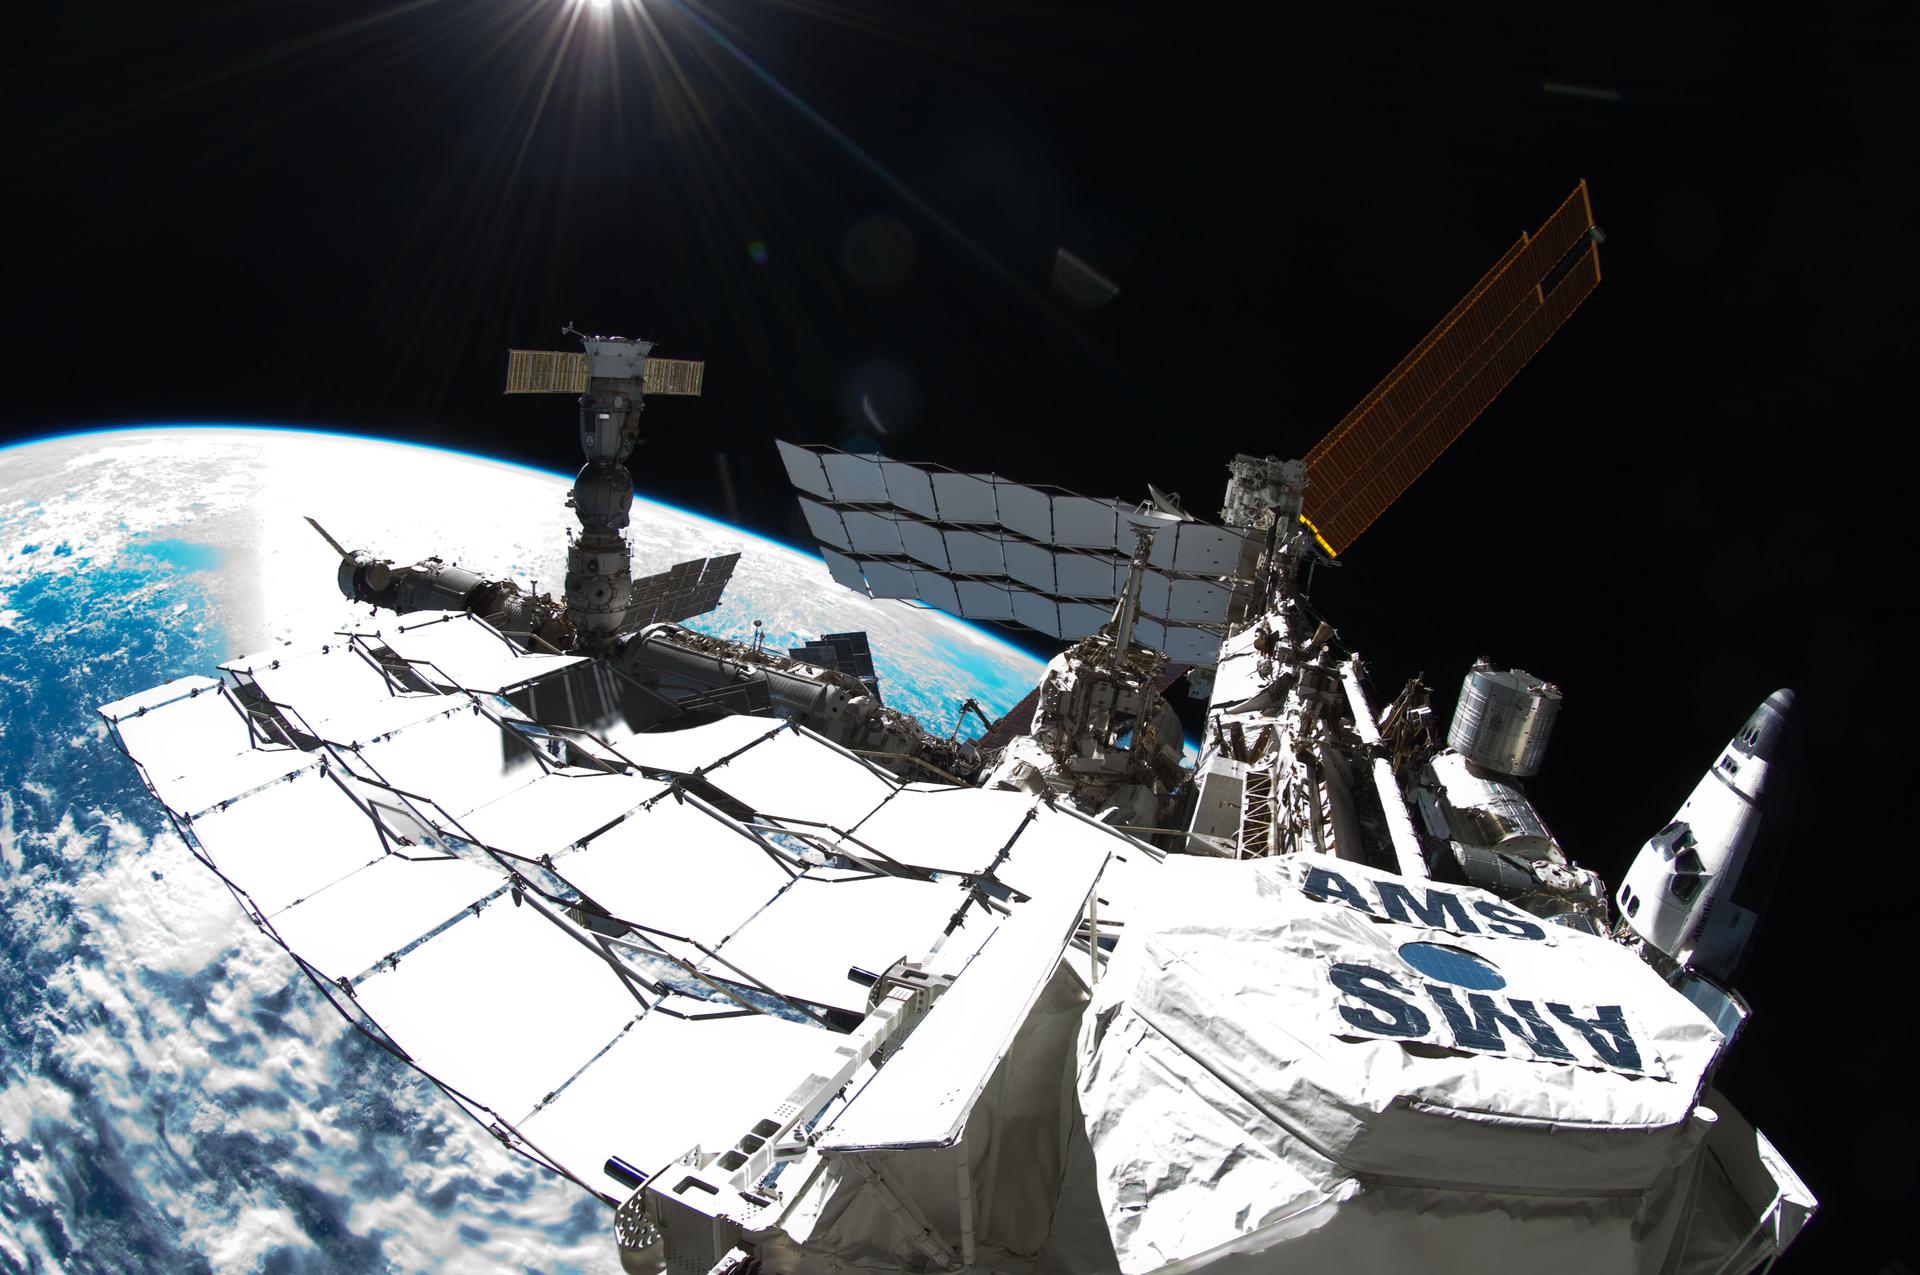 Photo of exterior view of the International Space Station, taken by NASA astronaut Ron Garan during a spacewalk conducted on July 12, 2011. The photo shows the space station with a Fisheye Camera and the curvature of Earth below.